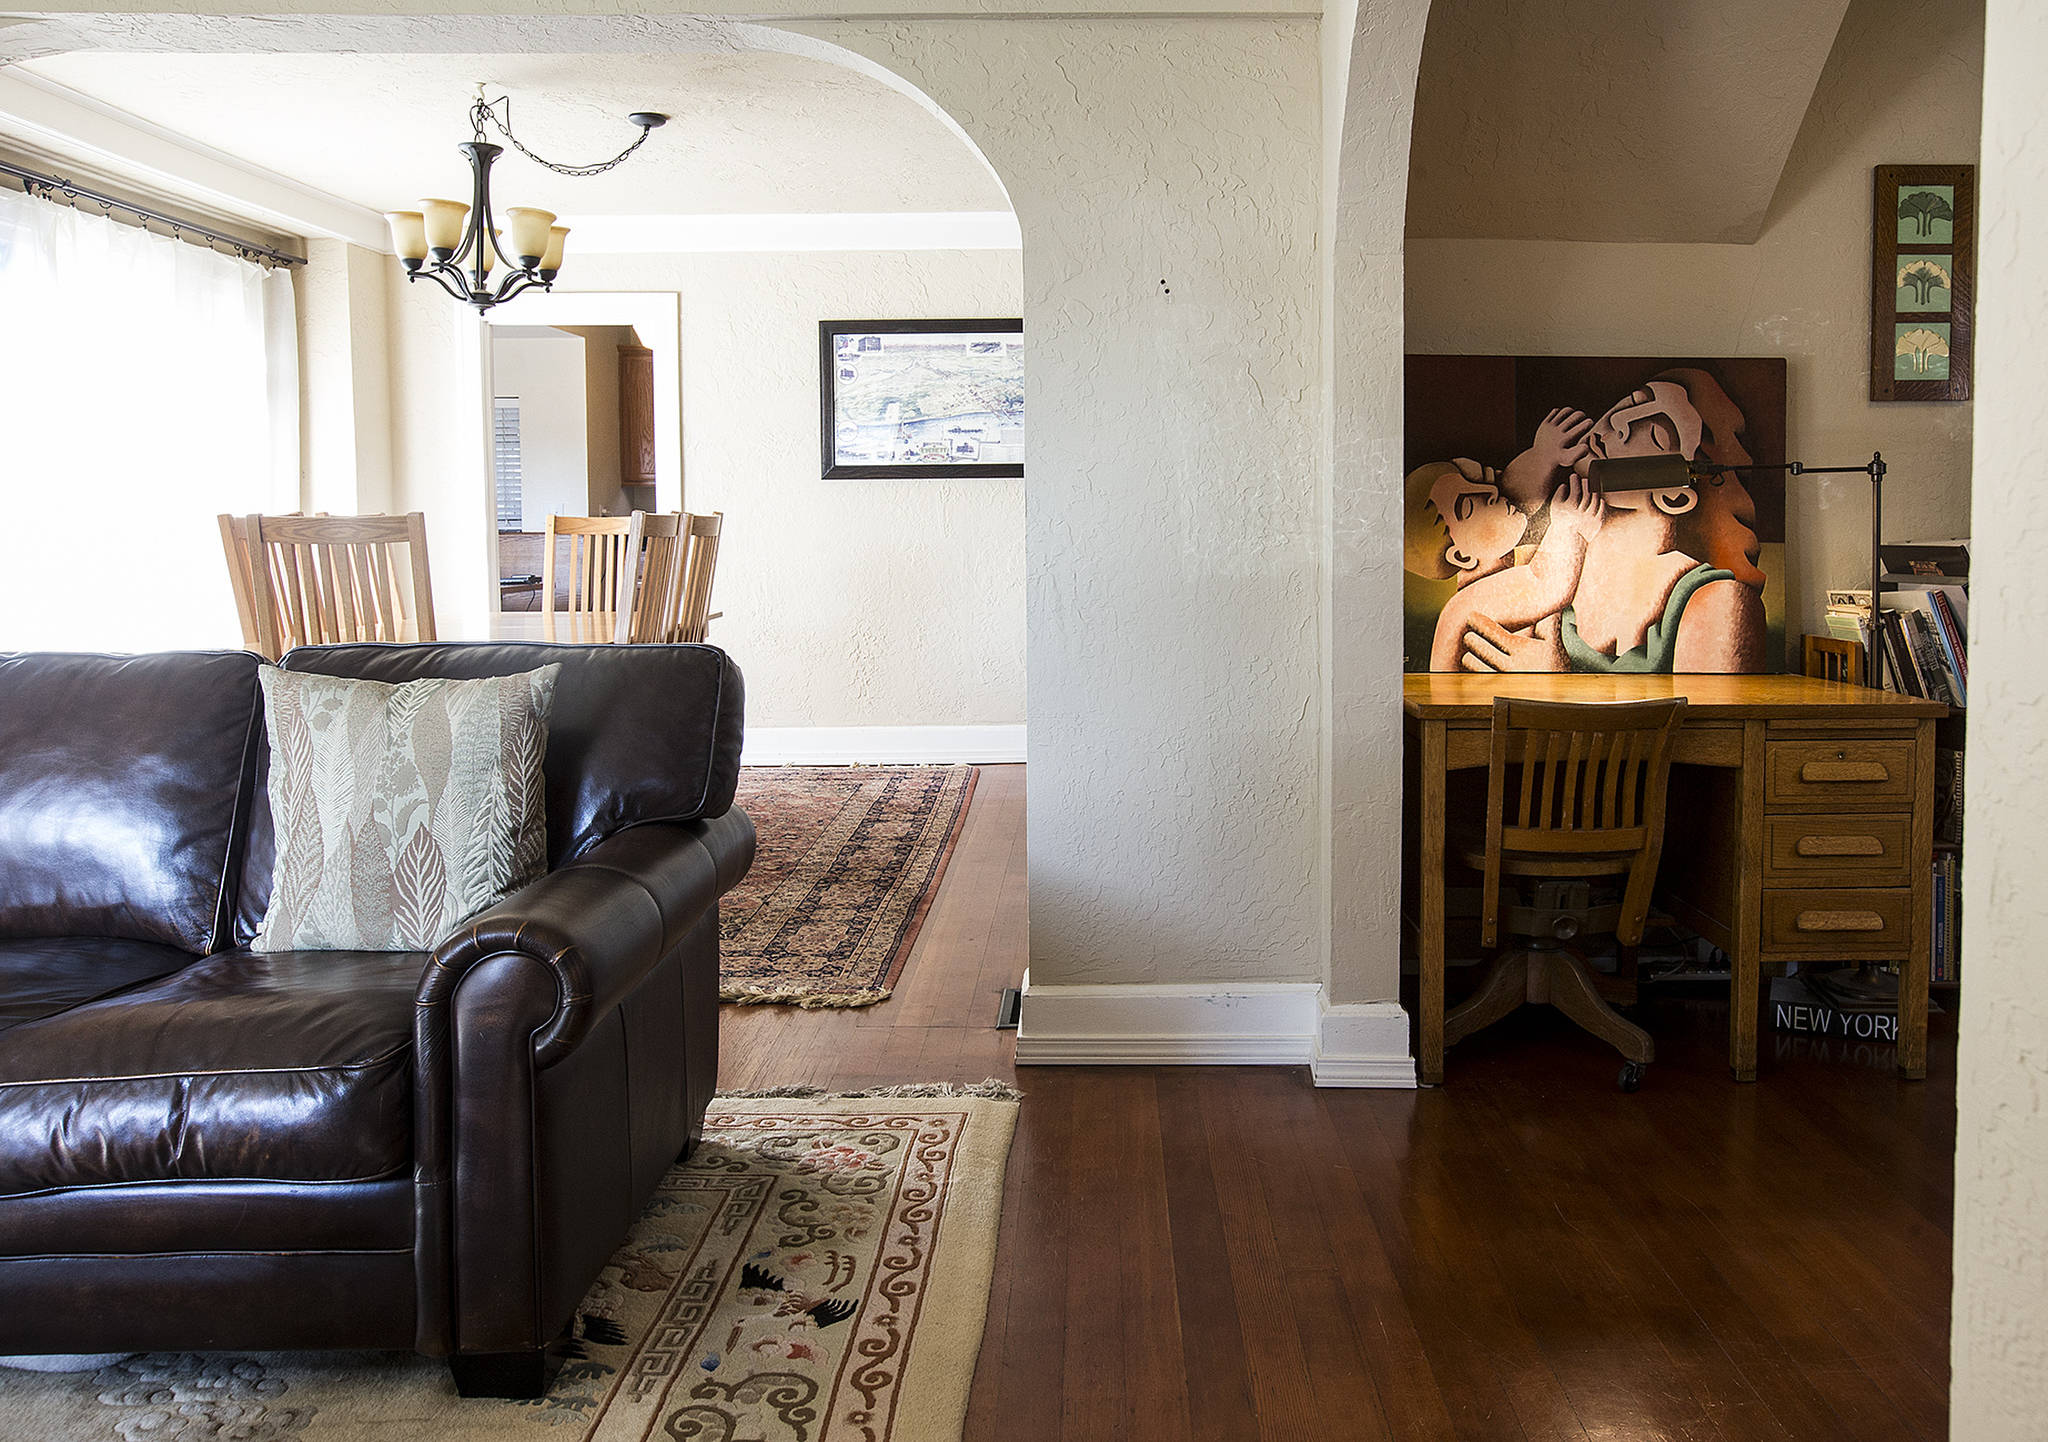 The interior of Nikki Oku and Tim Sonia’s Everett home is seen. (Ian Terry / The Herald)